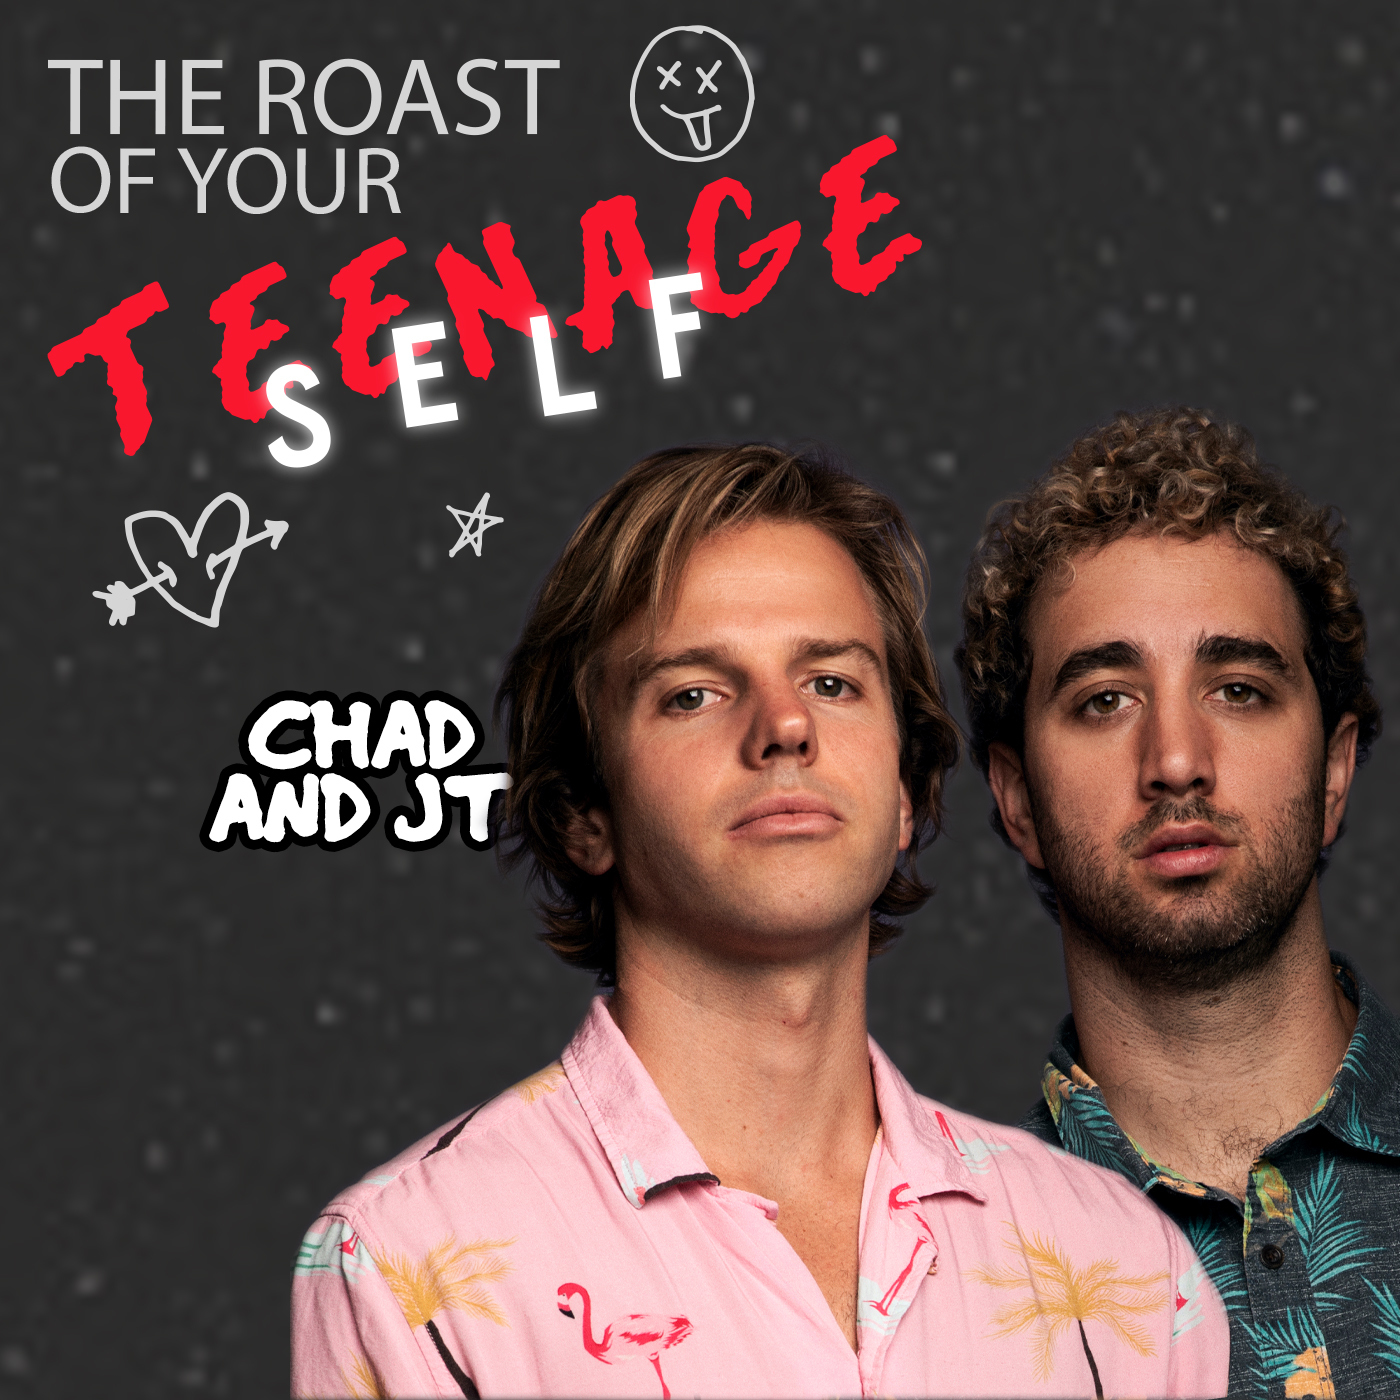 Going Deep w/ Chad & JT: The Roast of Your Teenage Self Podcast w/ Alise Morales